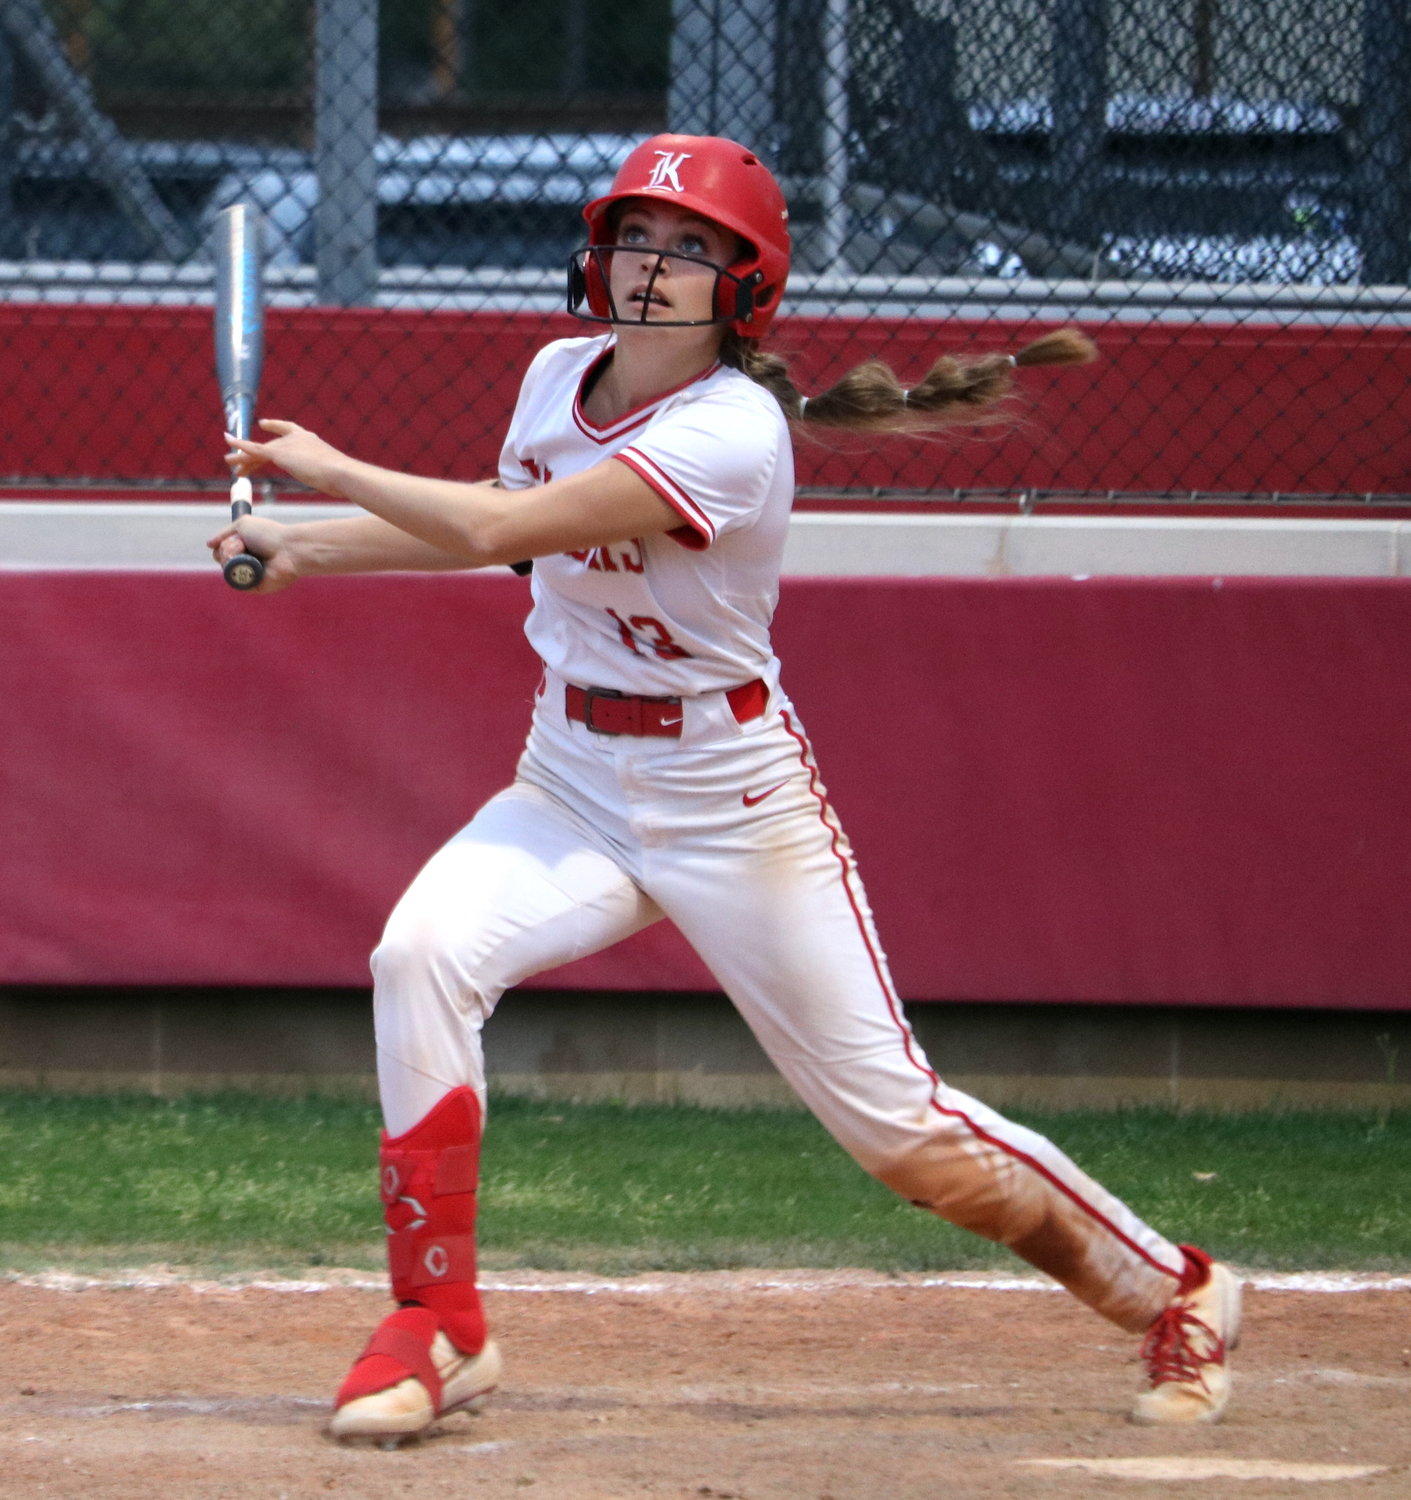 Kaylie Wyckoff watches after hitting a ball to left field during Tuesday’s game between Katy and Taylor at the Katy softball field.